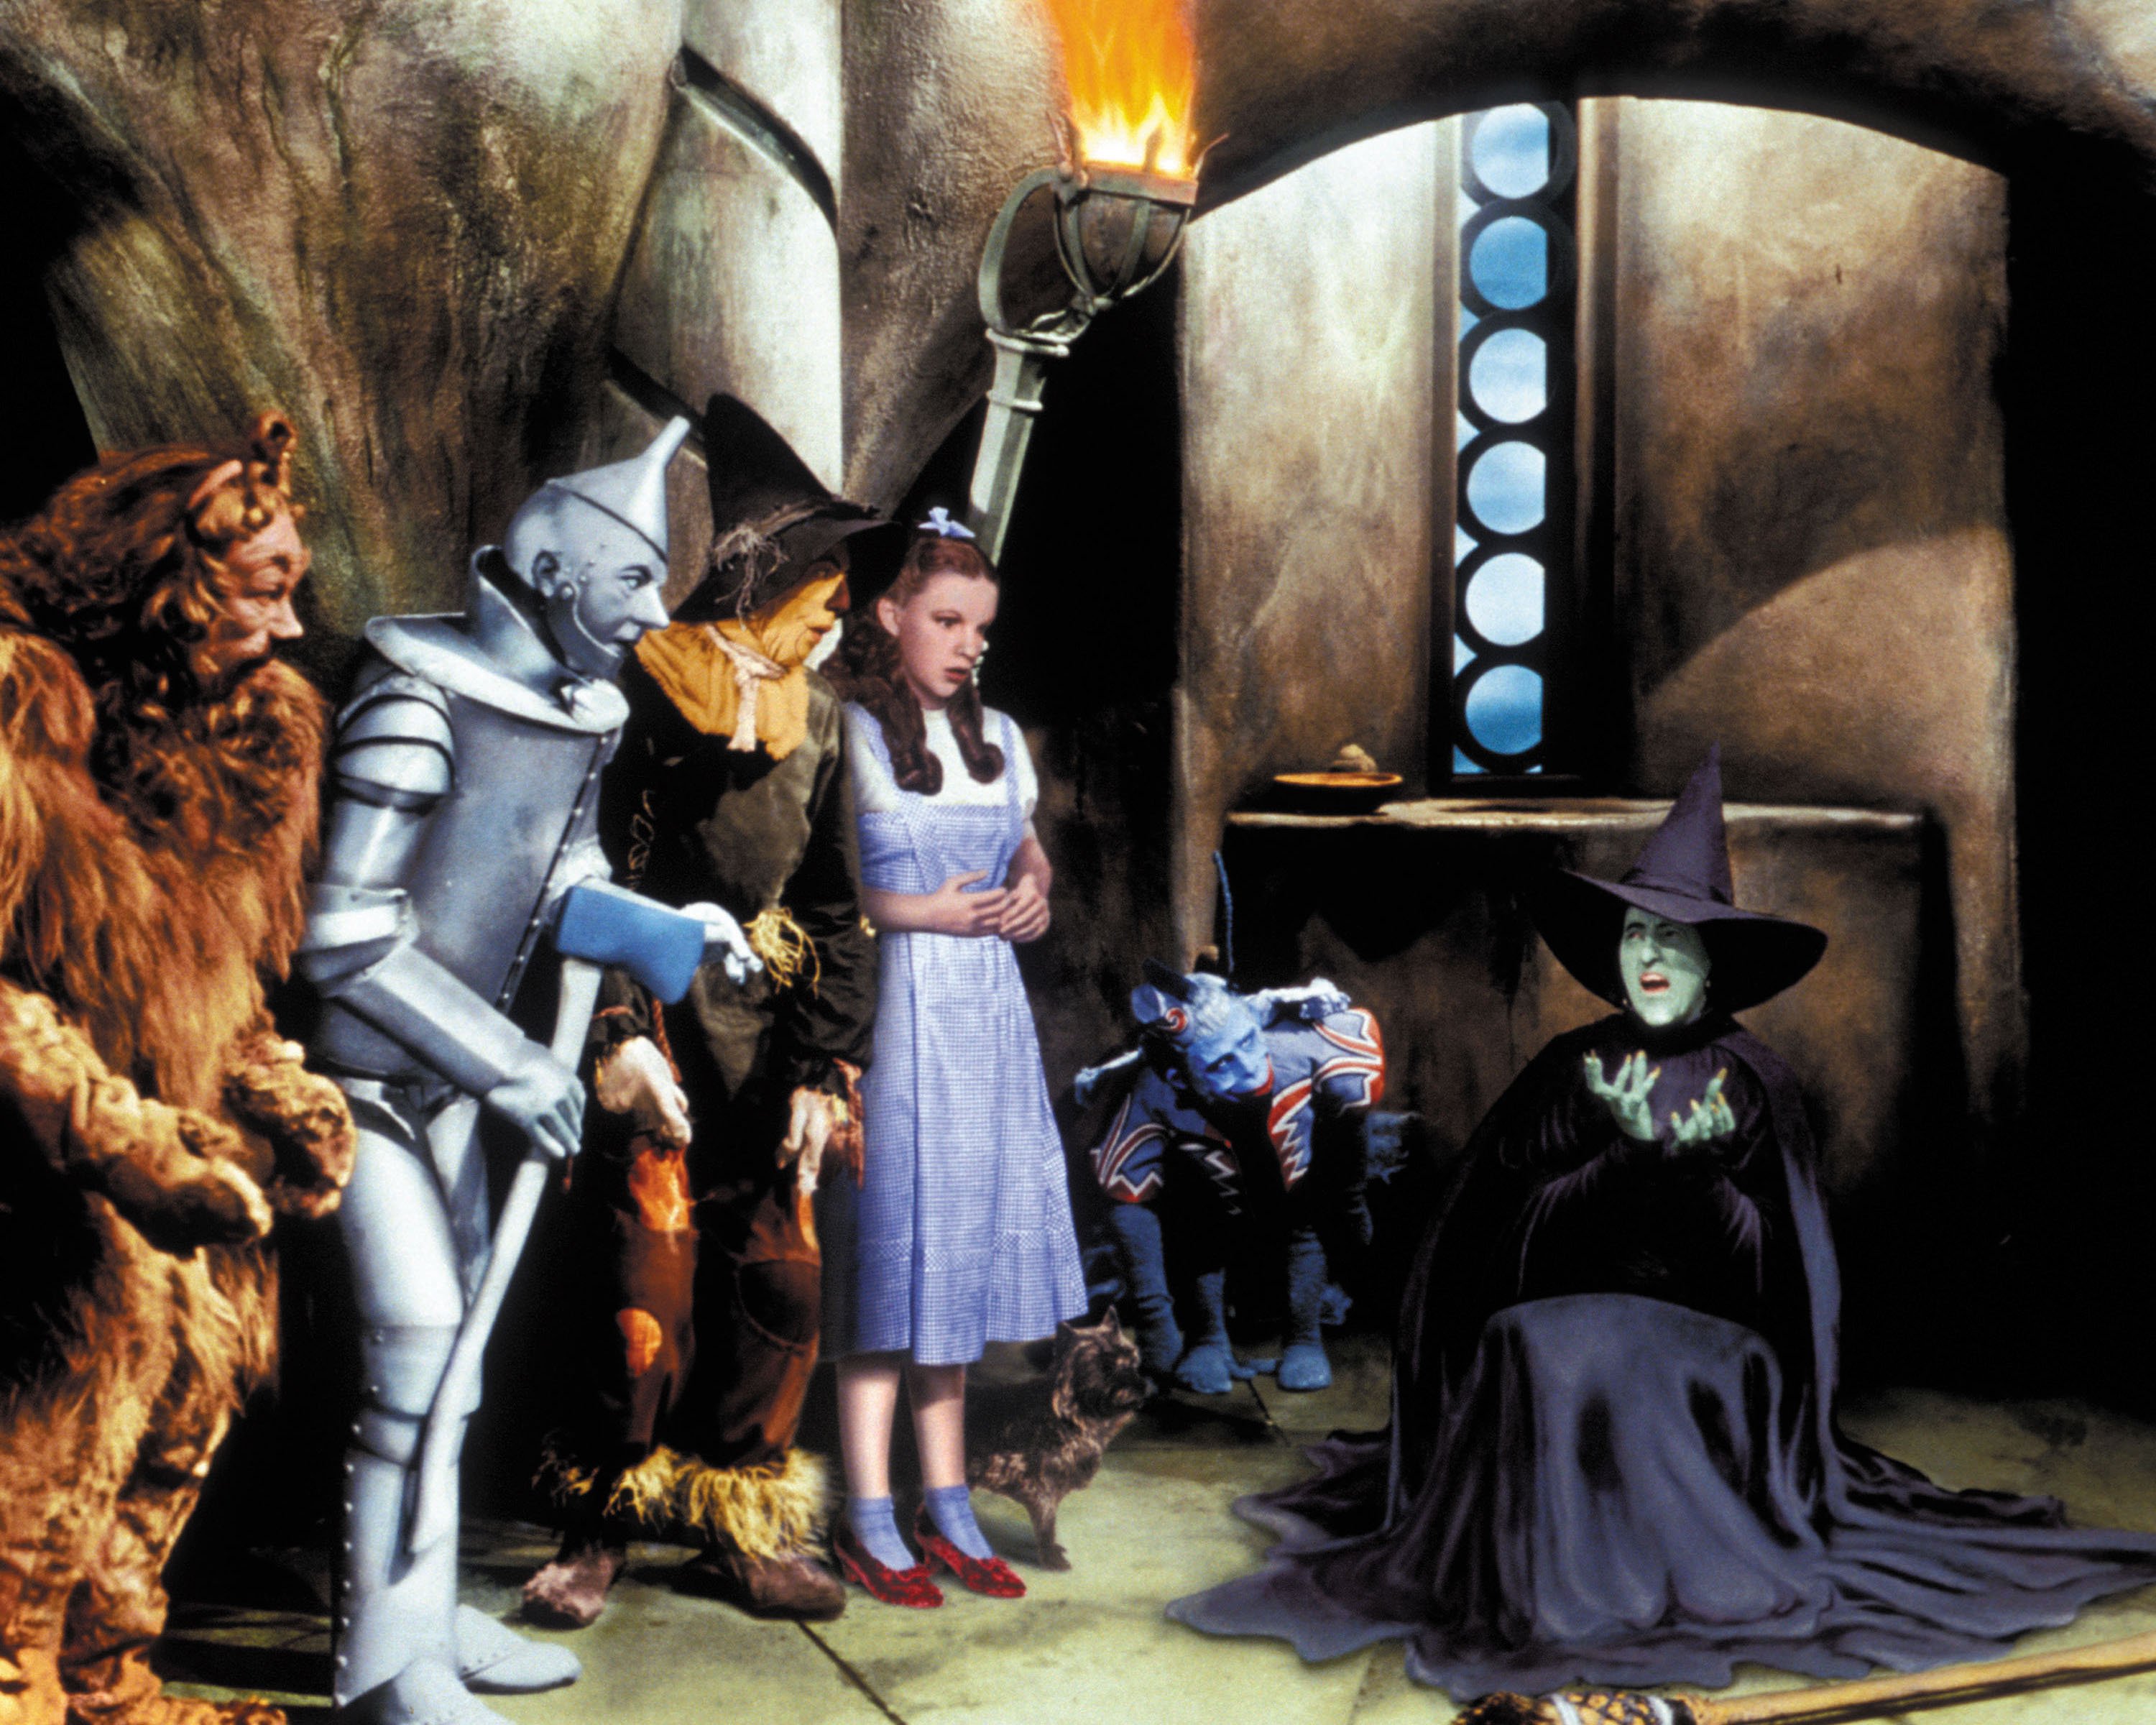 A scene from 'The Wizard of Oz'